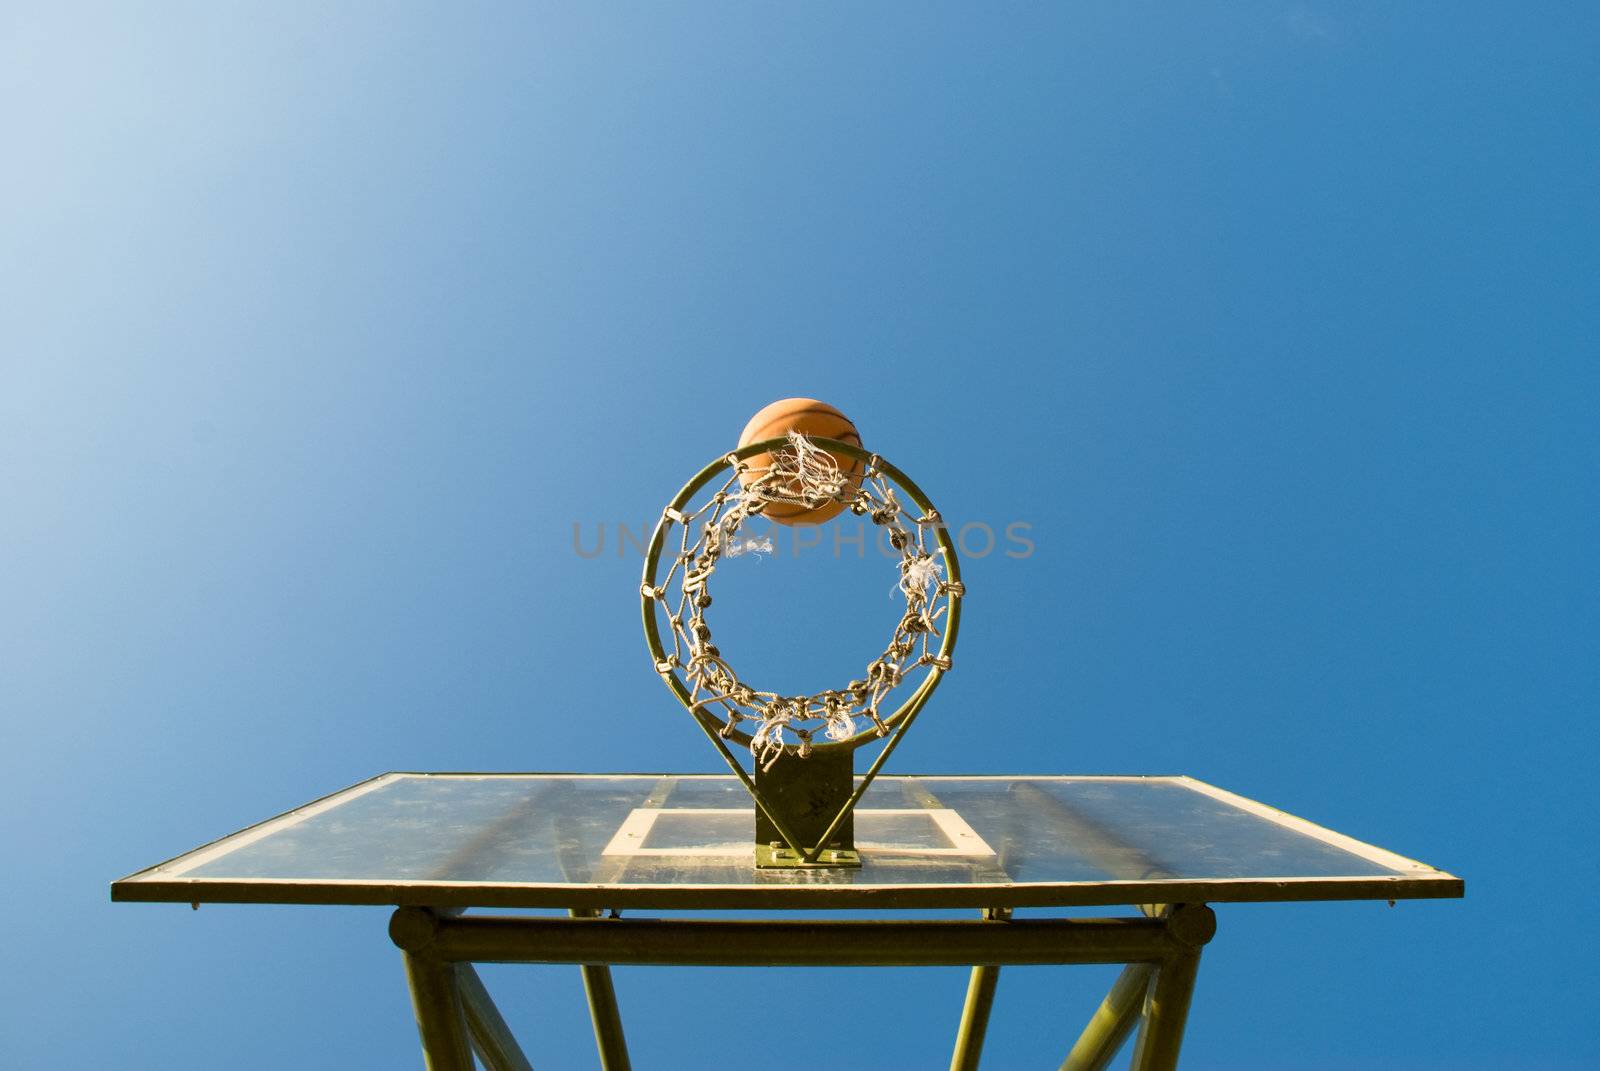 Basketball just before dropping into the net in a basketball game on an open court at sunset, seen directly under the net.